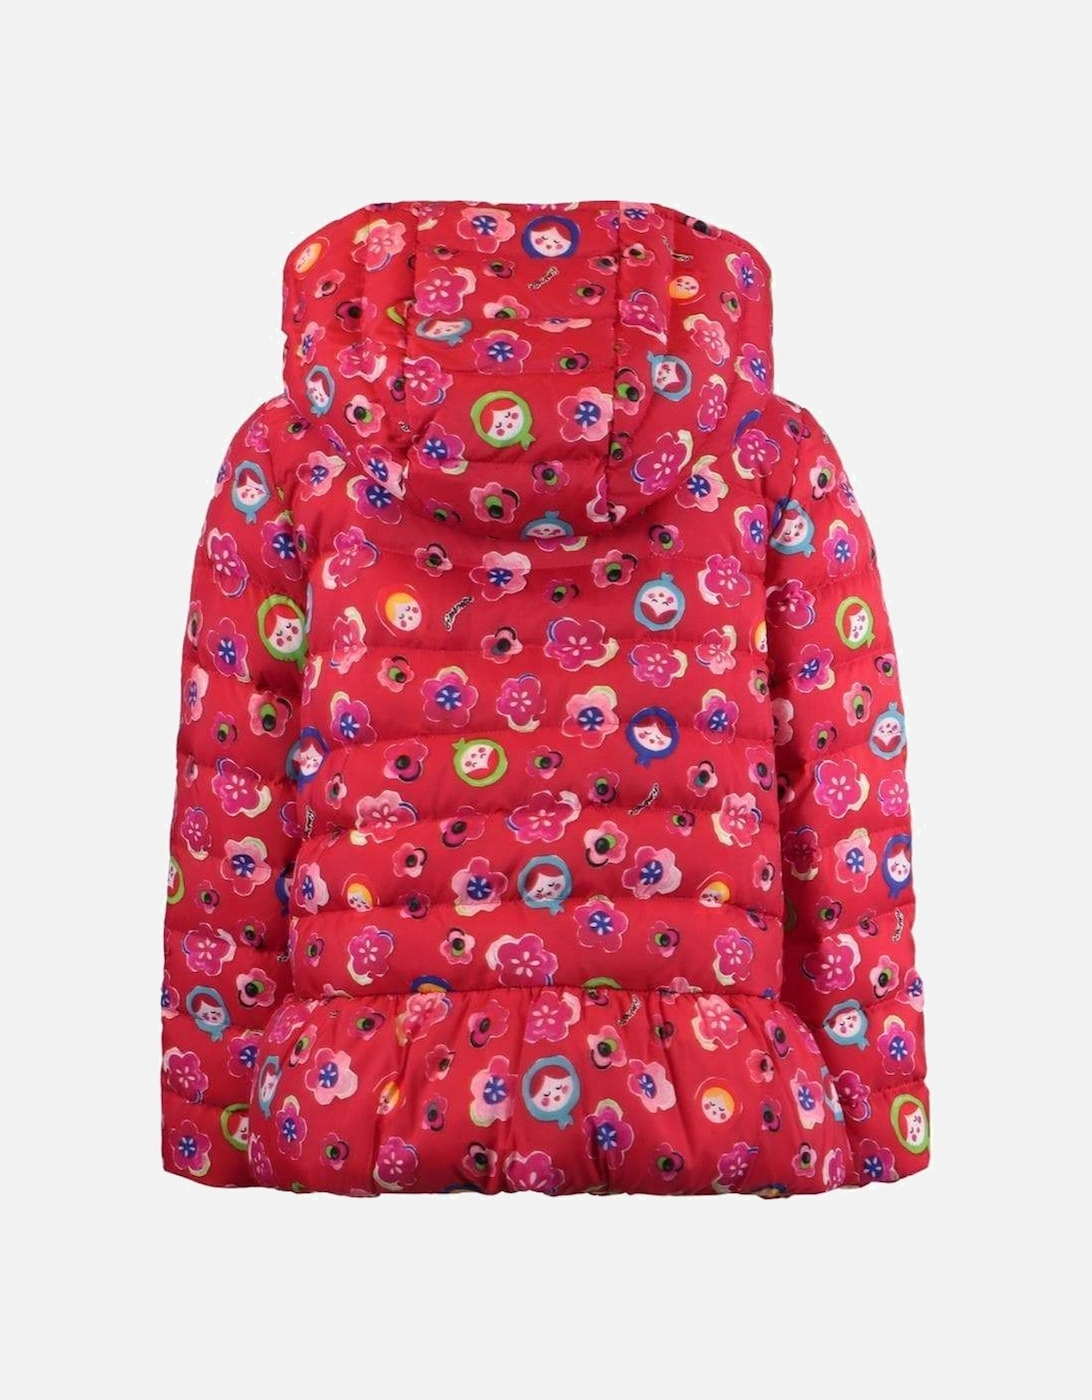 Girls Red Floral Padded Jacket